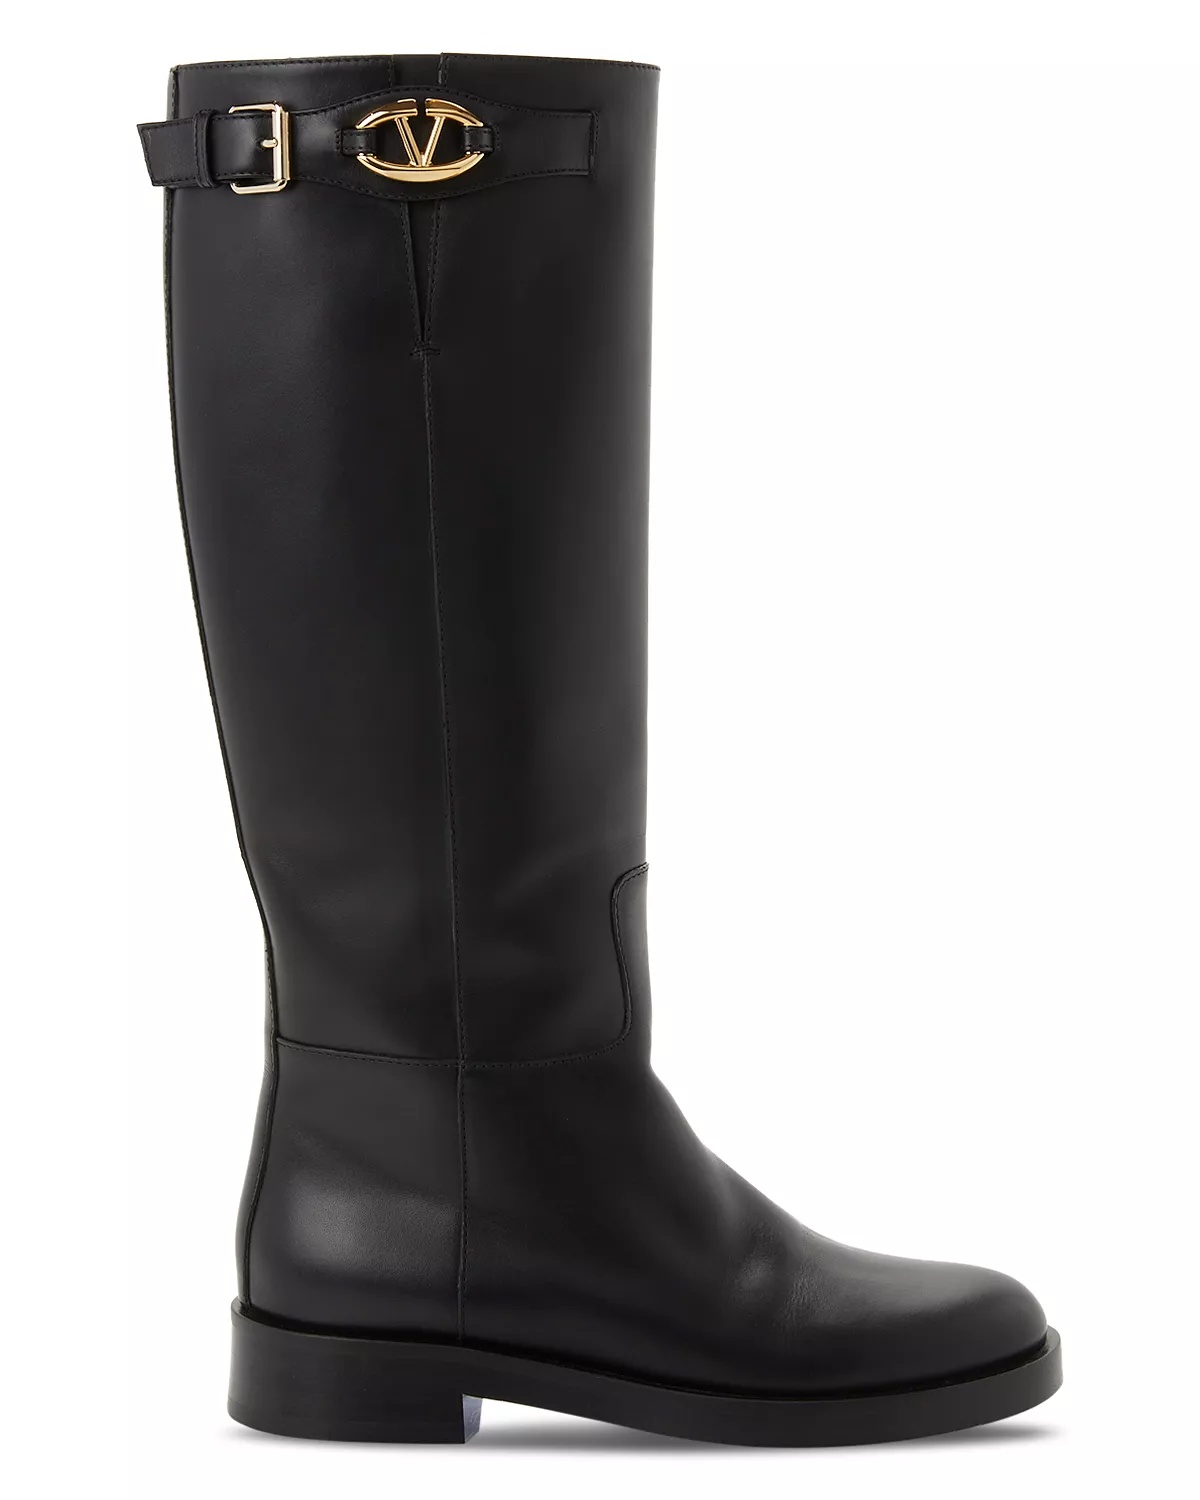 Women's Buckled Riding Boots - 3